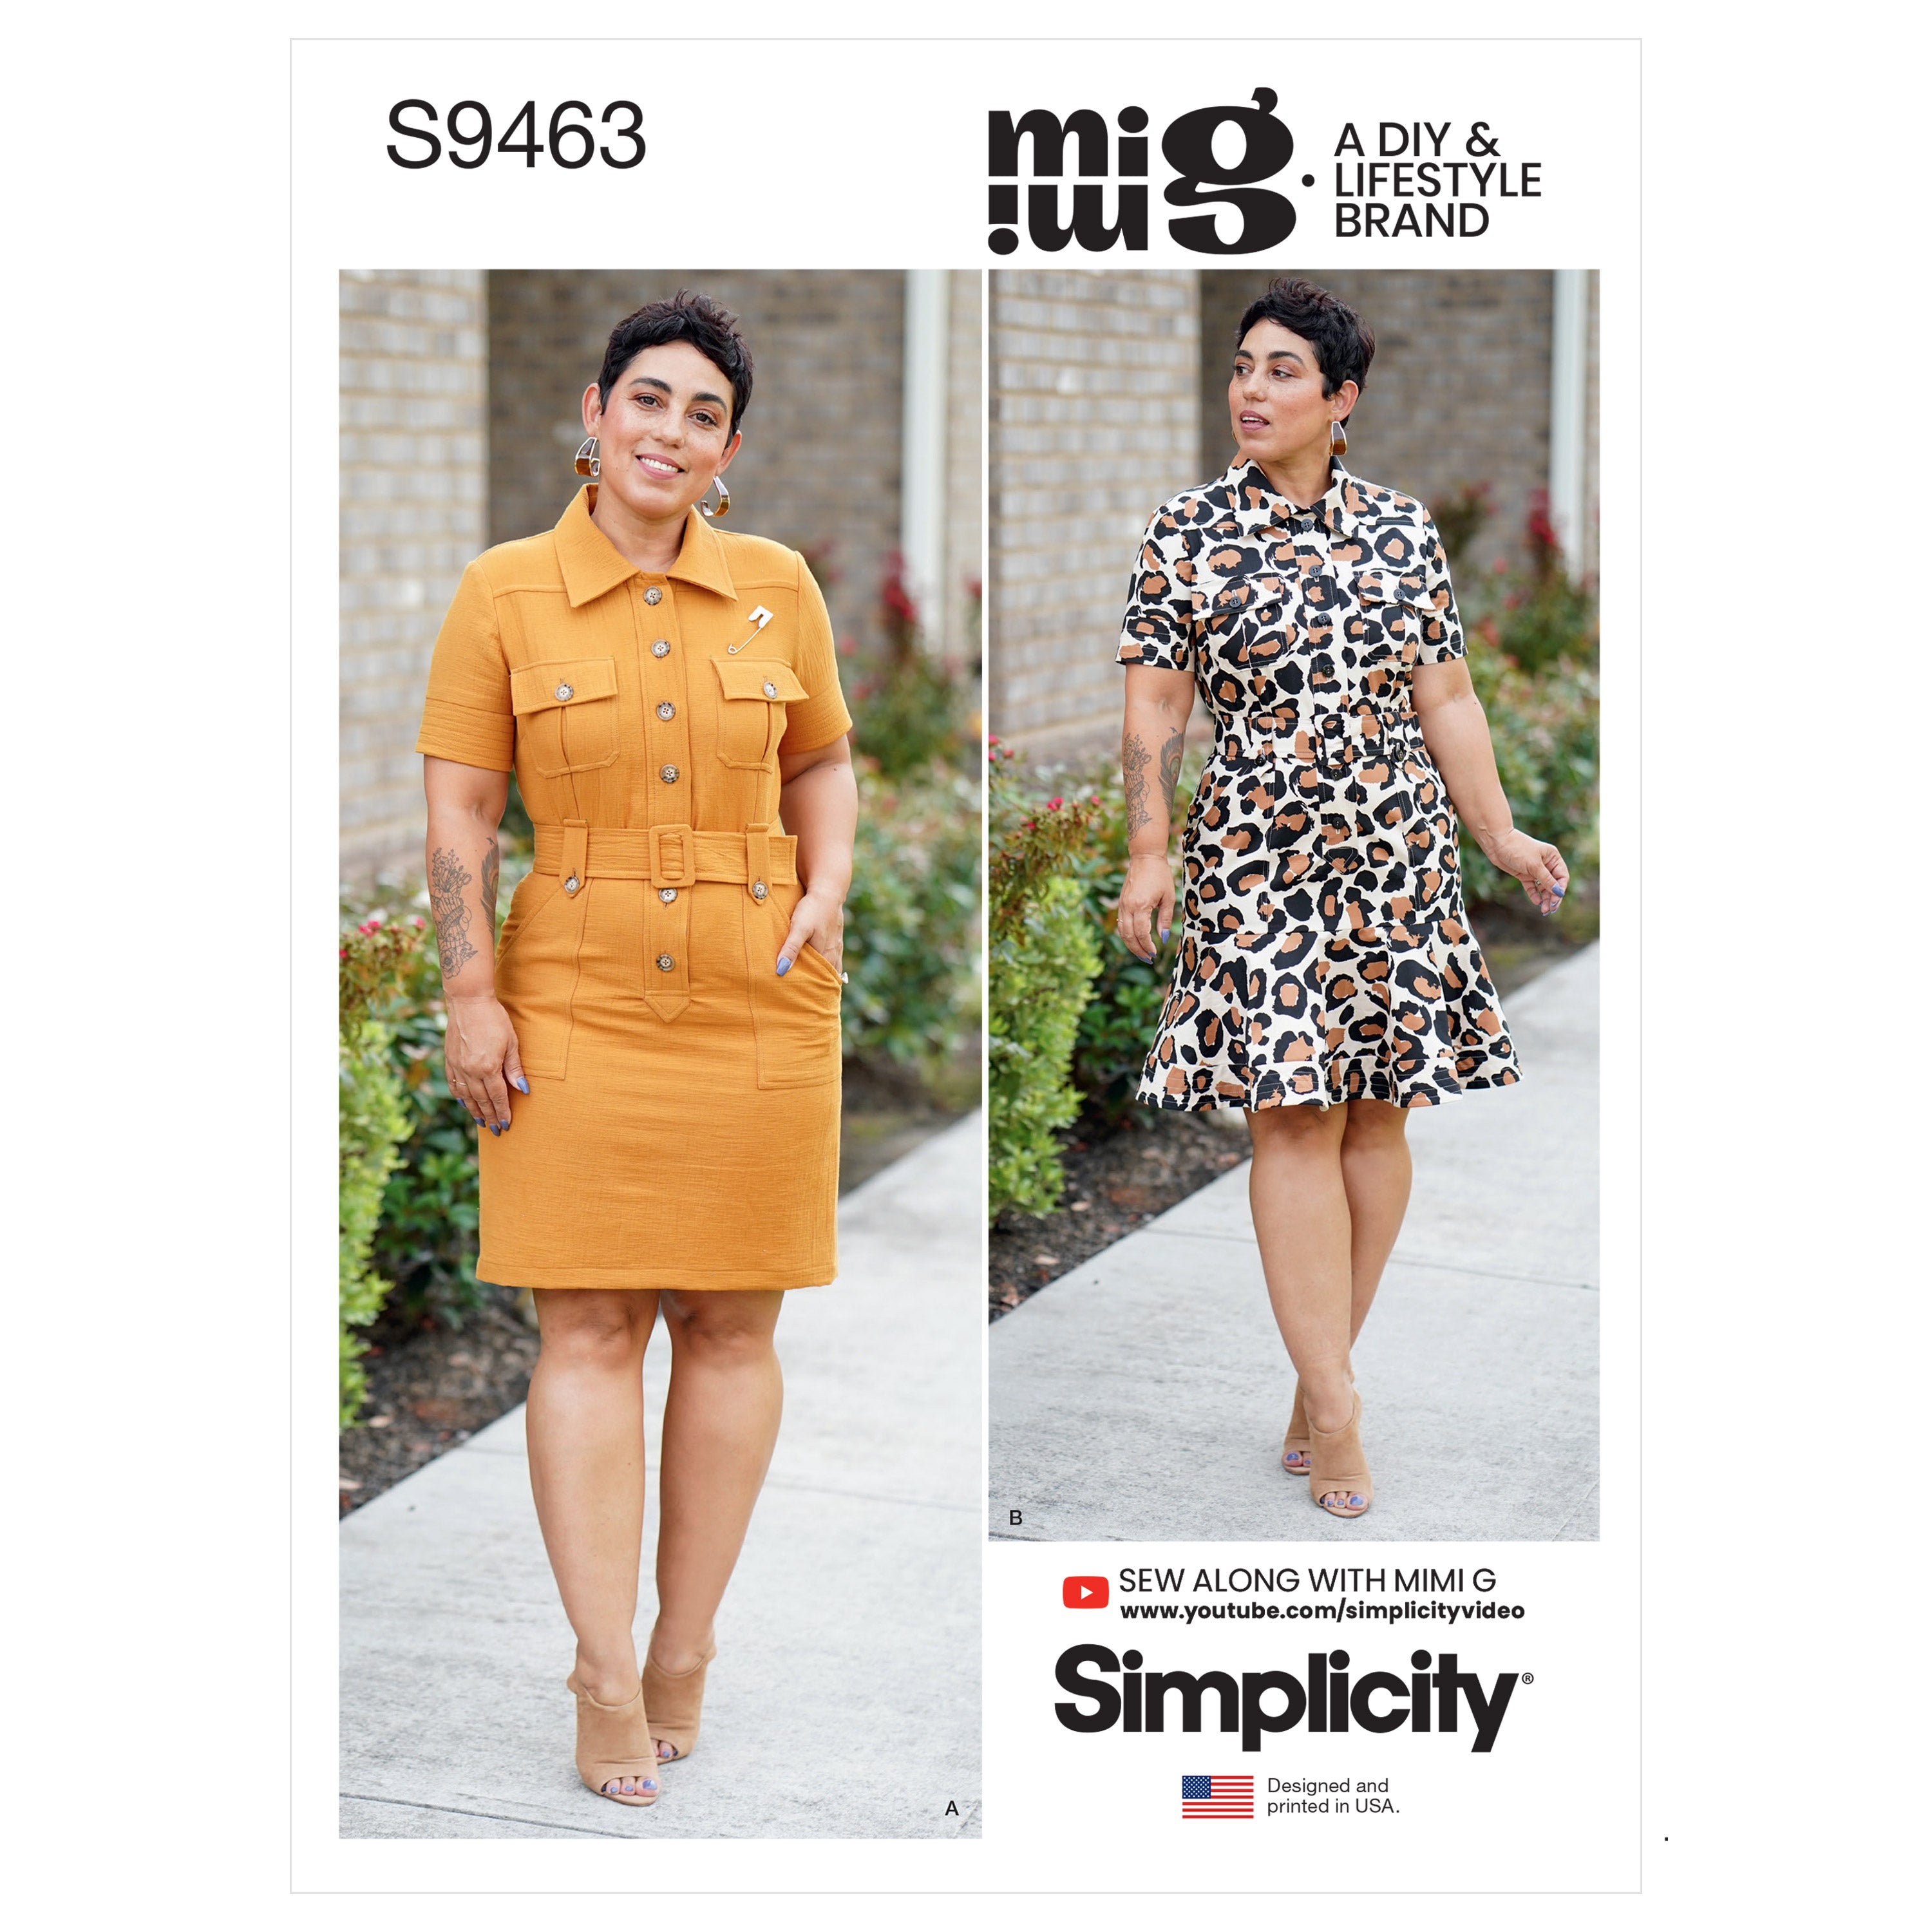 Simplicity Sewing Pattern 9463 Misses Shirt Dress with Belt from Jaycotts Sewing Supplies